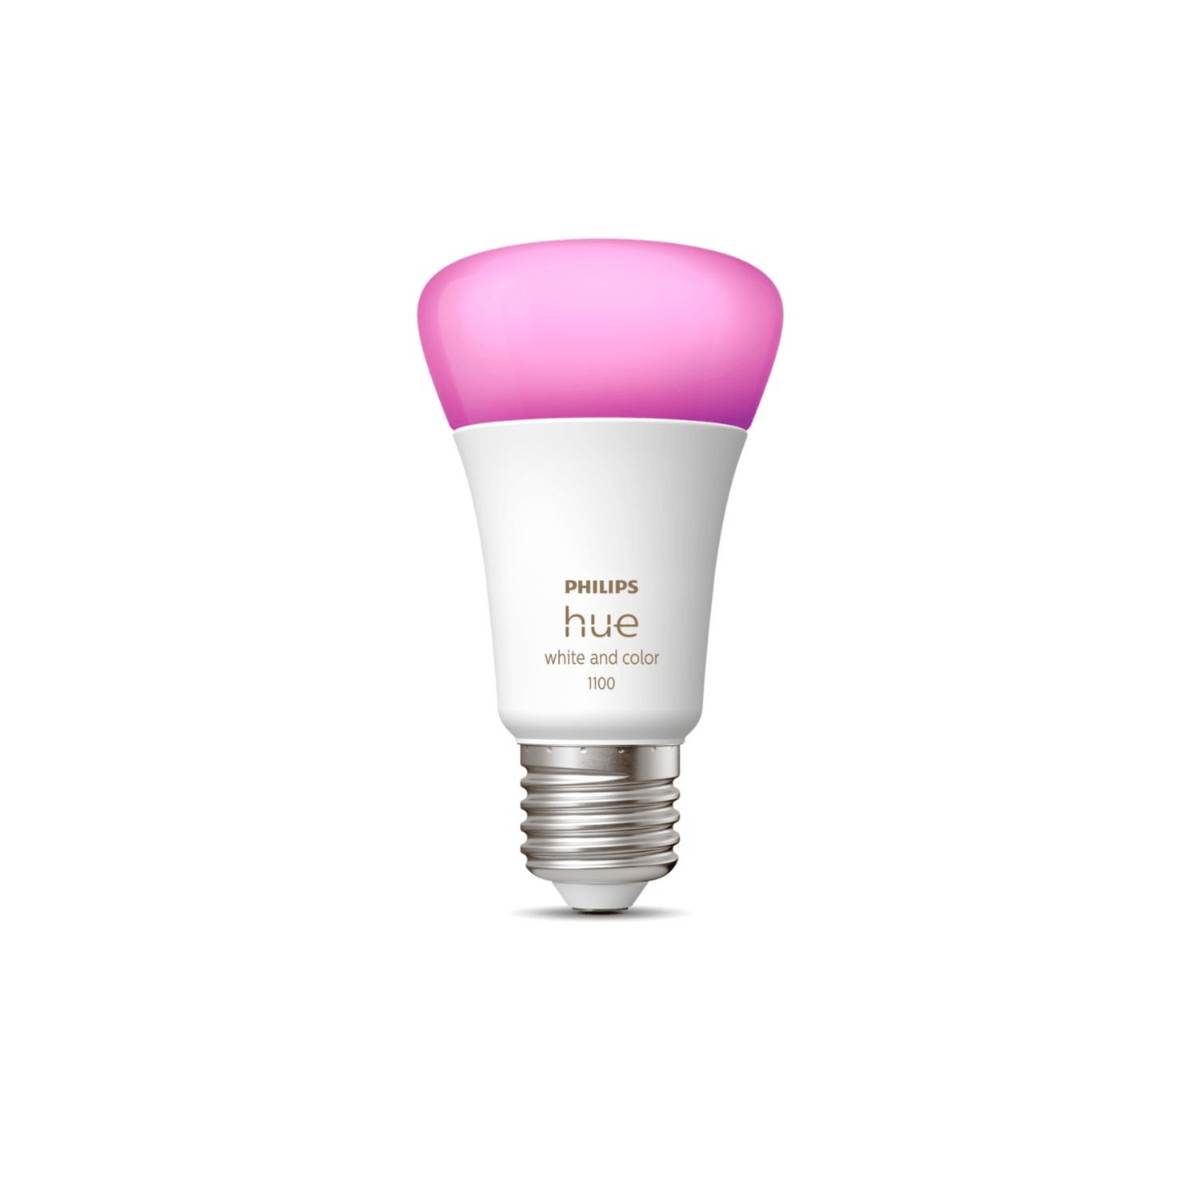 Philips Hue White and | Color RGBW via Ambiance Onlineshop Licht Smart dimmbar Leuchtmittel | E27 | Dein A60 | | Home Sprache oder LED 800lm per your-smarthome E27 Lampe App